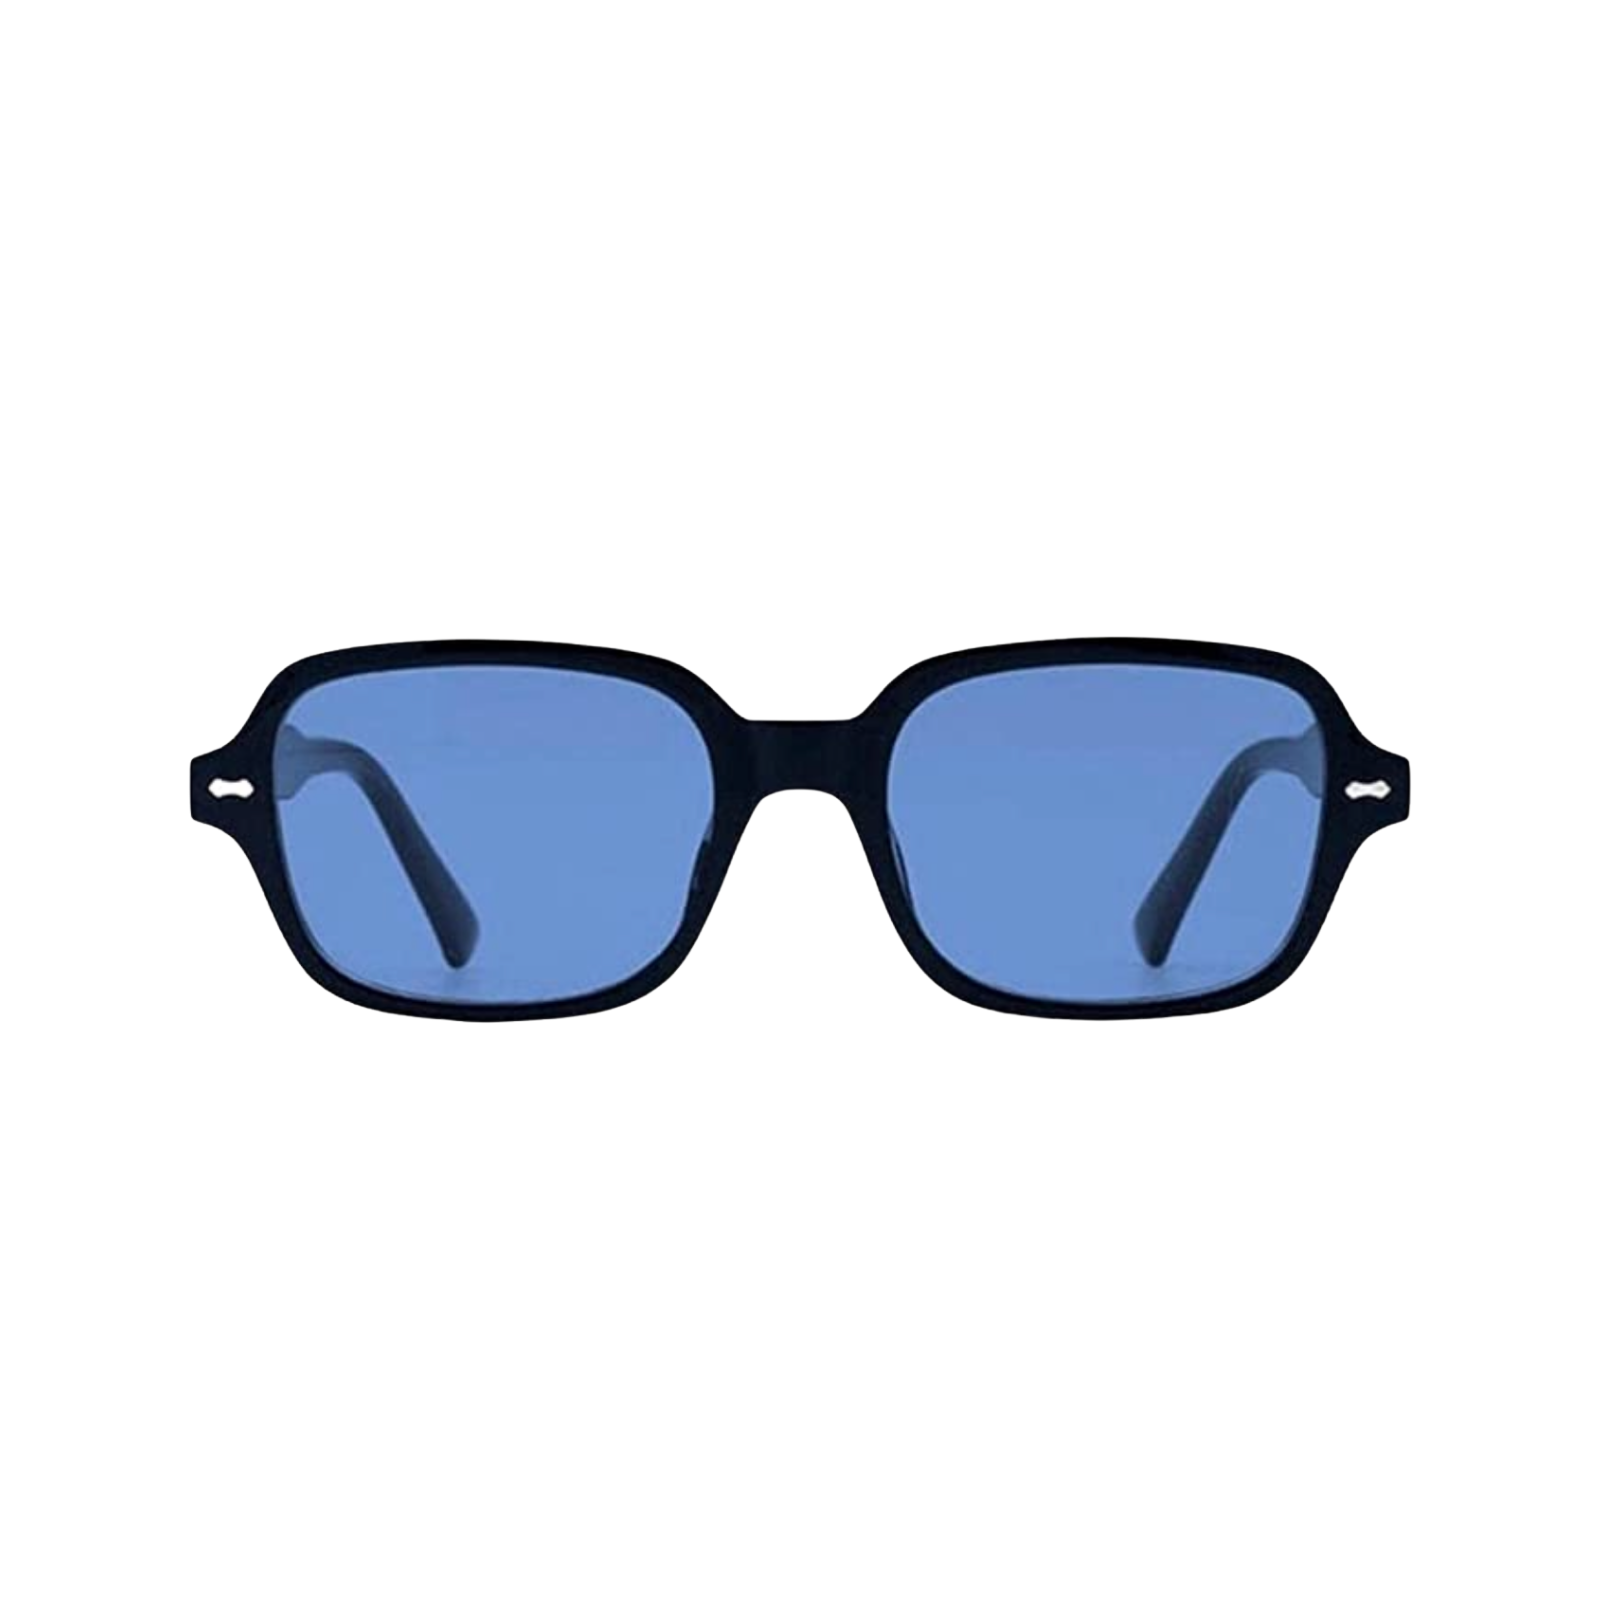 Storm Sunglasses in Blue